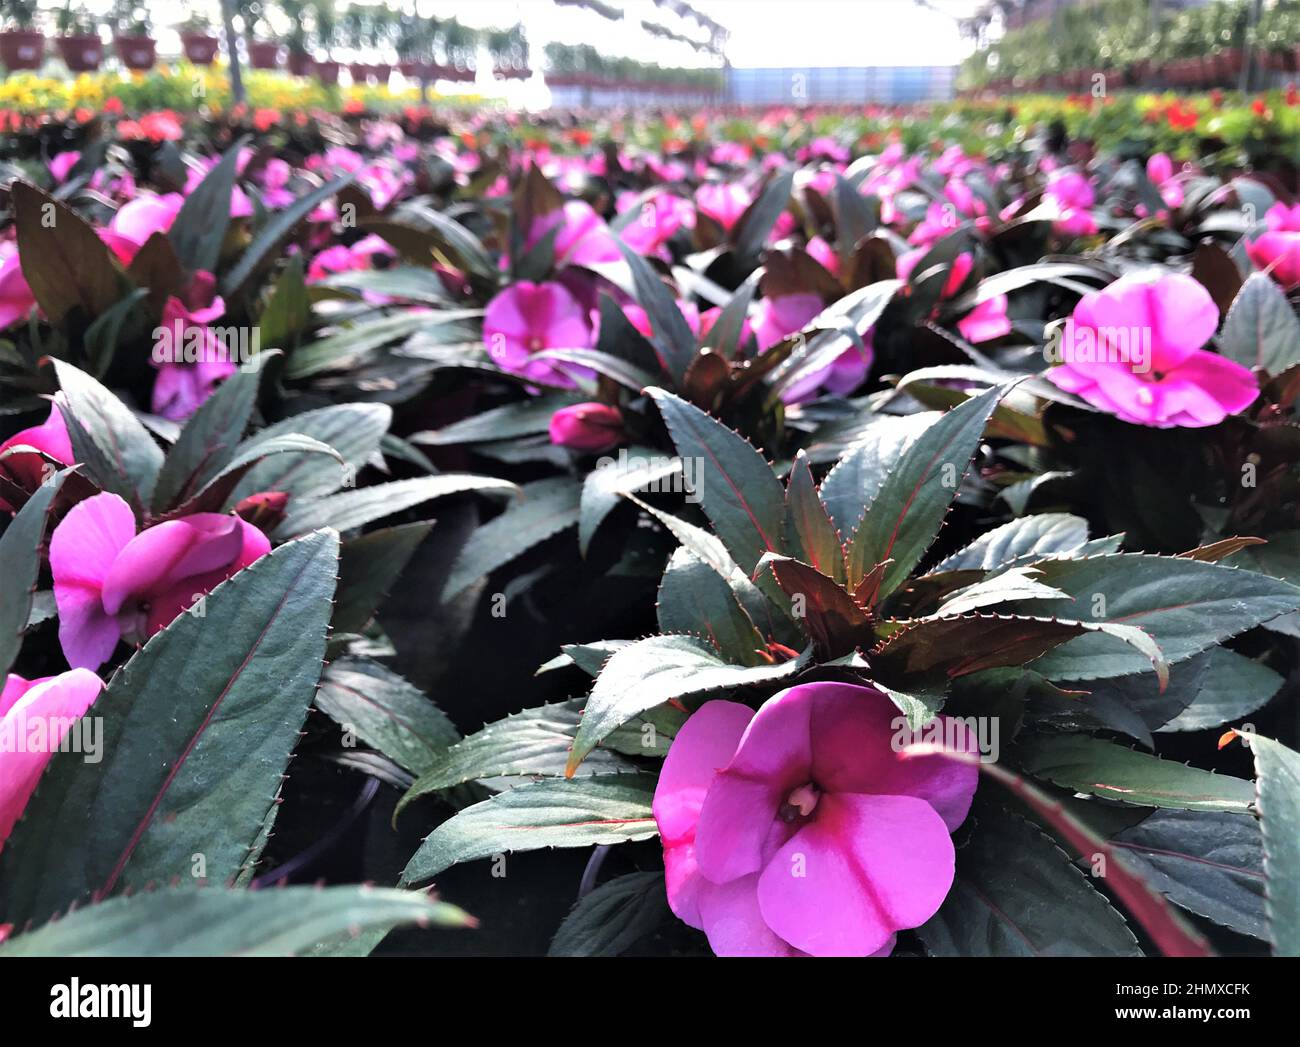 Close-up of bright pink balsamic flowers with dark green leaves grown in pots in a greenhouse. Stock Photo